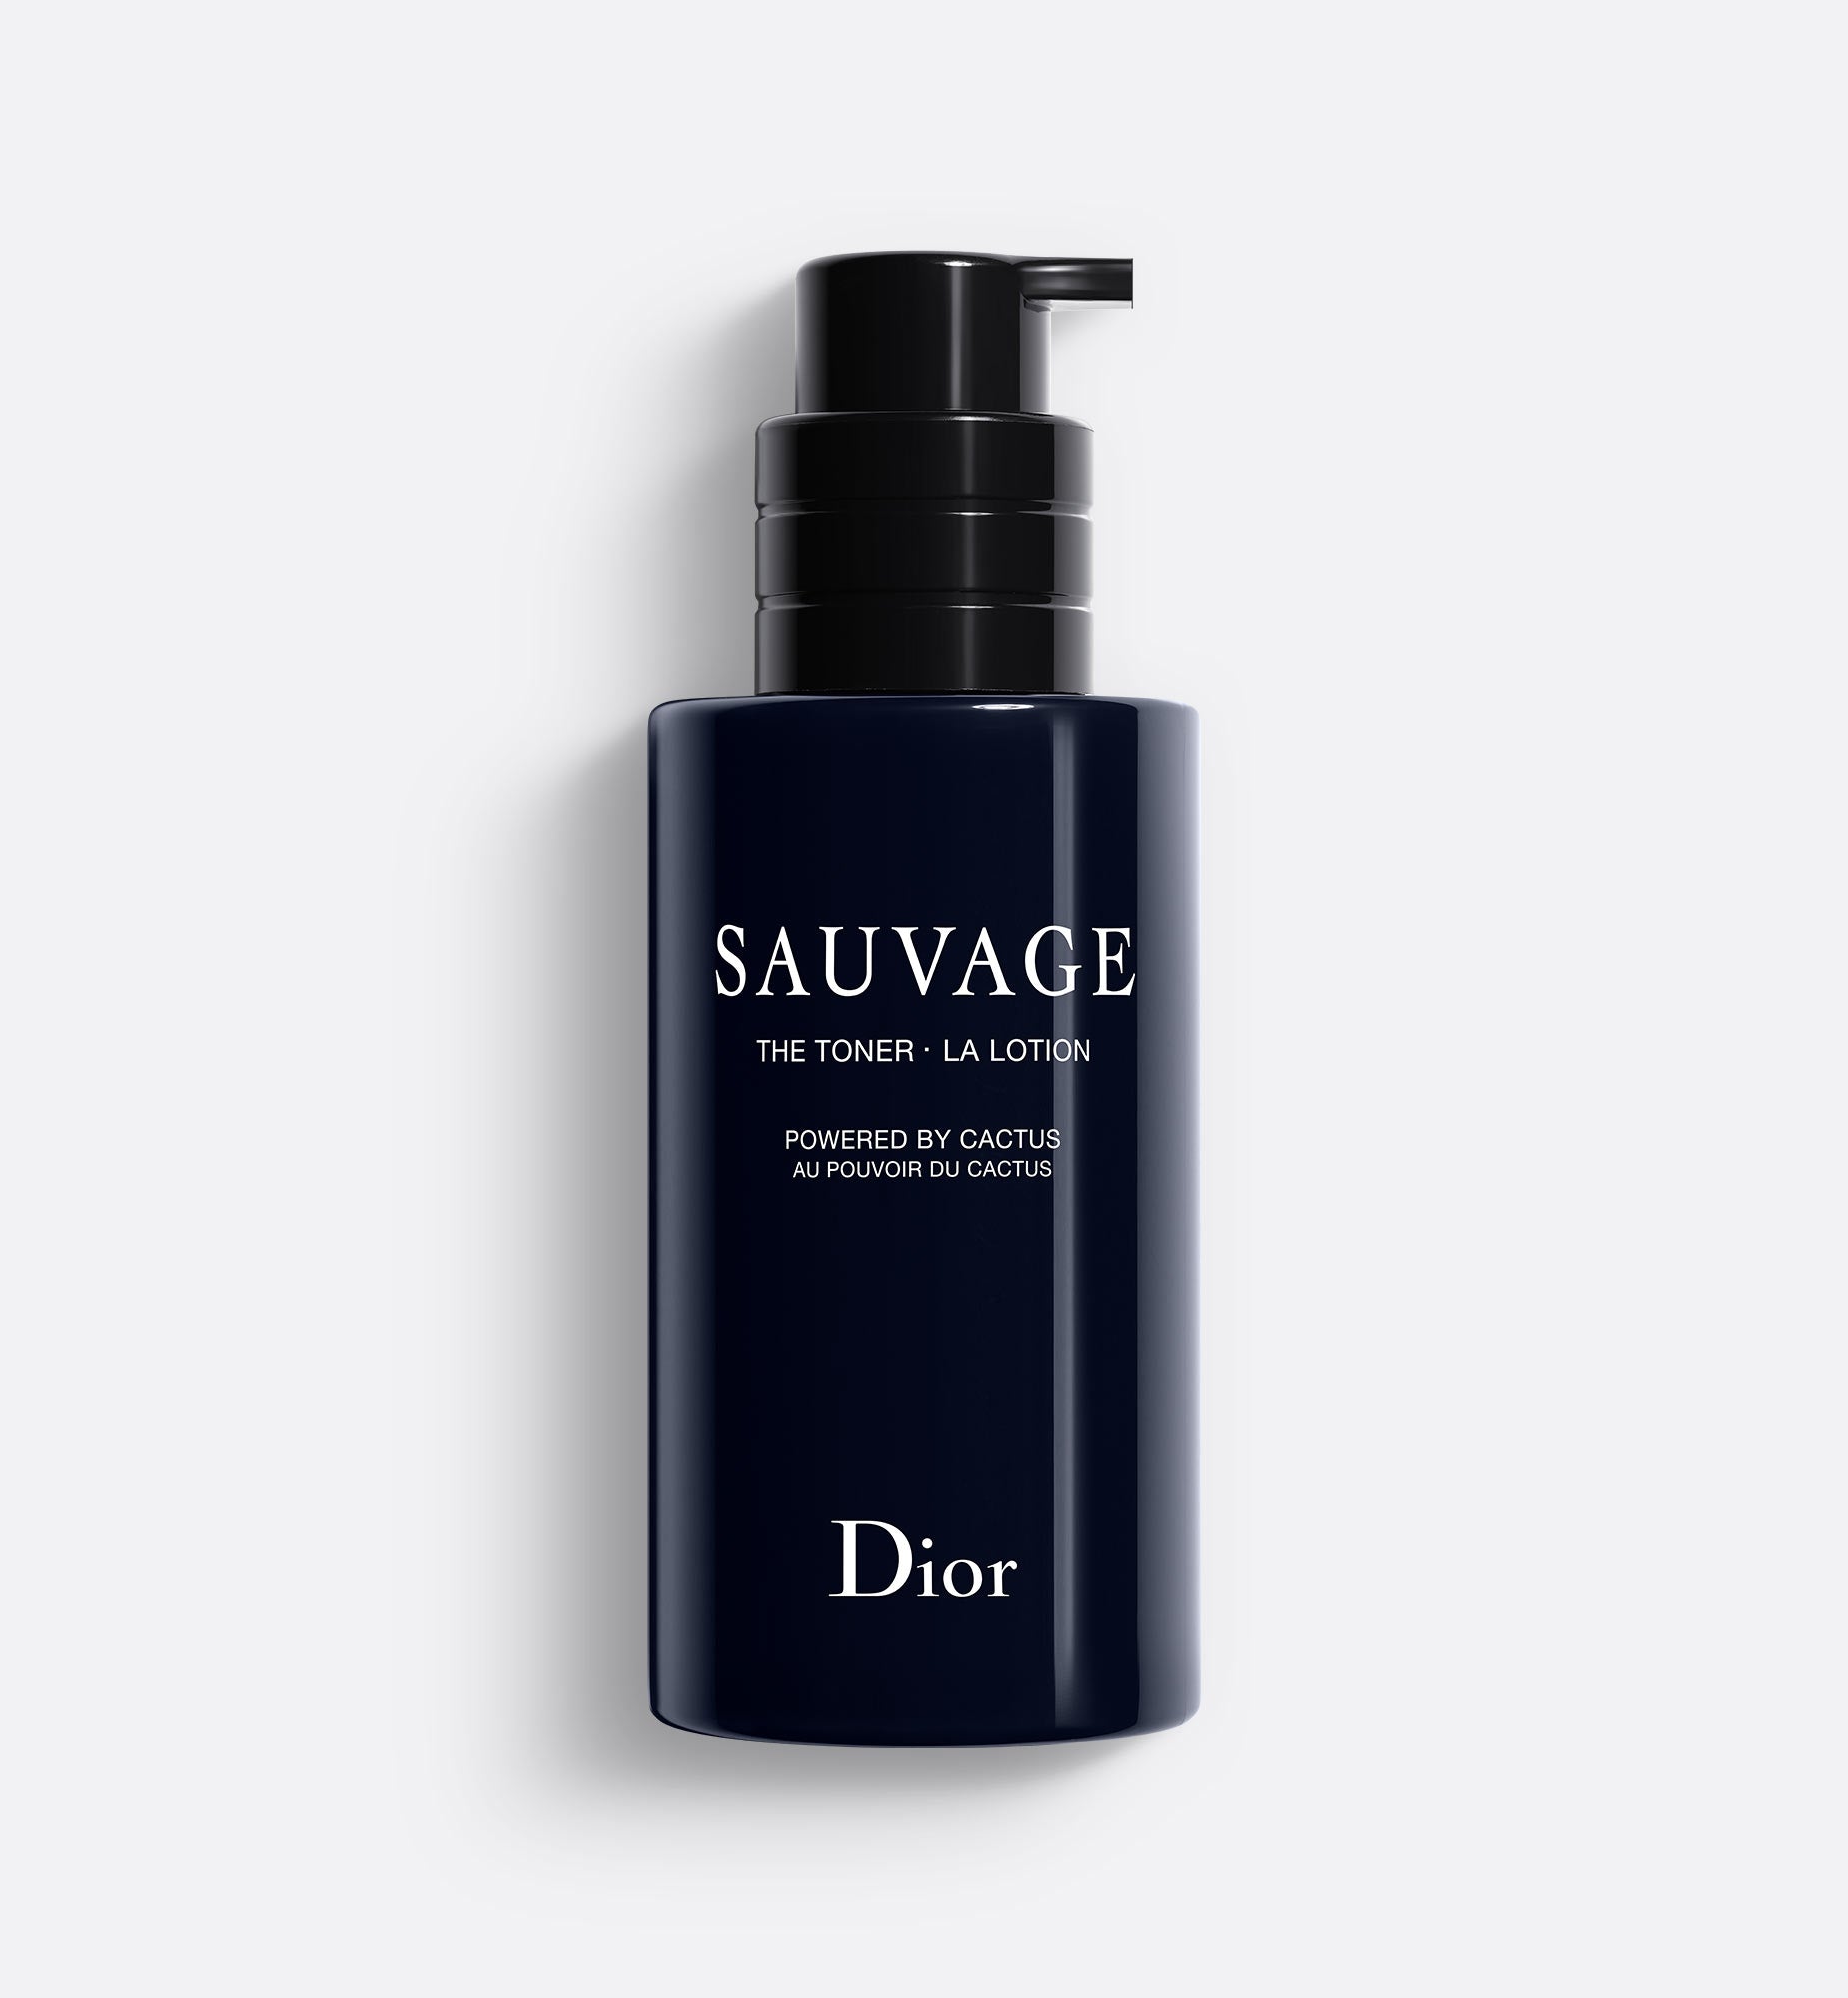 Sauvage The Toner | Face Toner Lotion with Cactus Extract - Energizing and Soothing